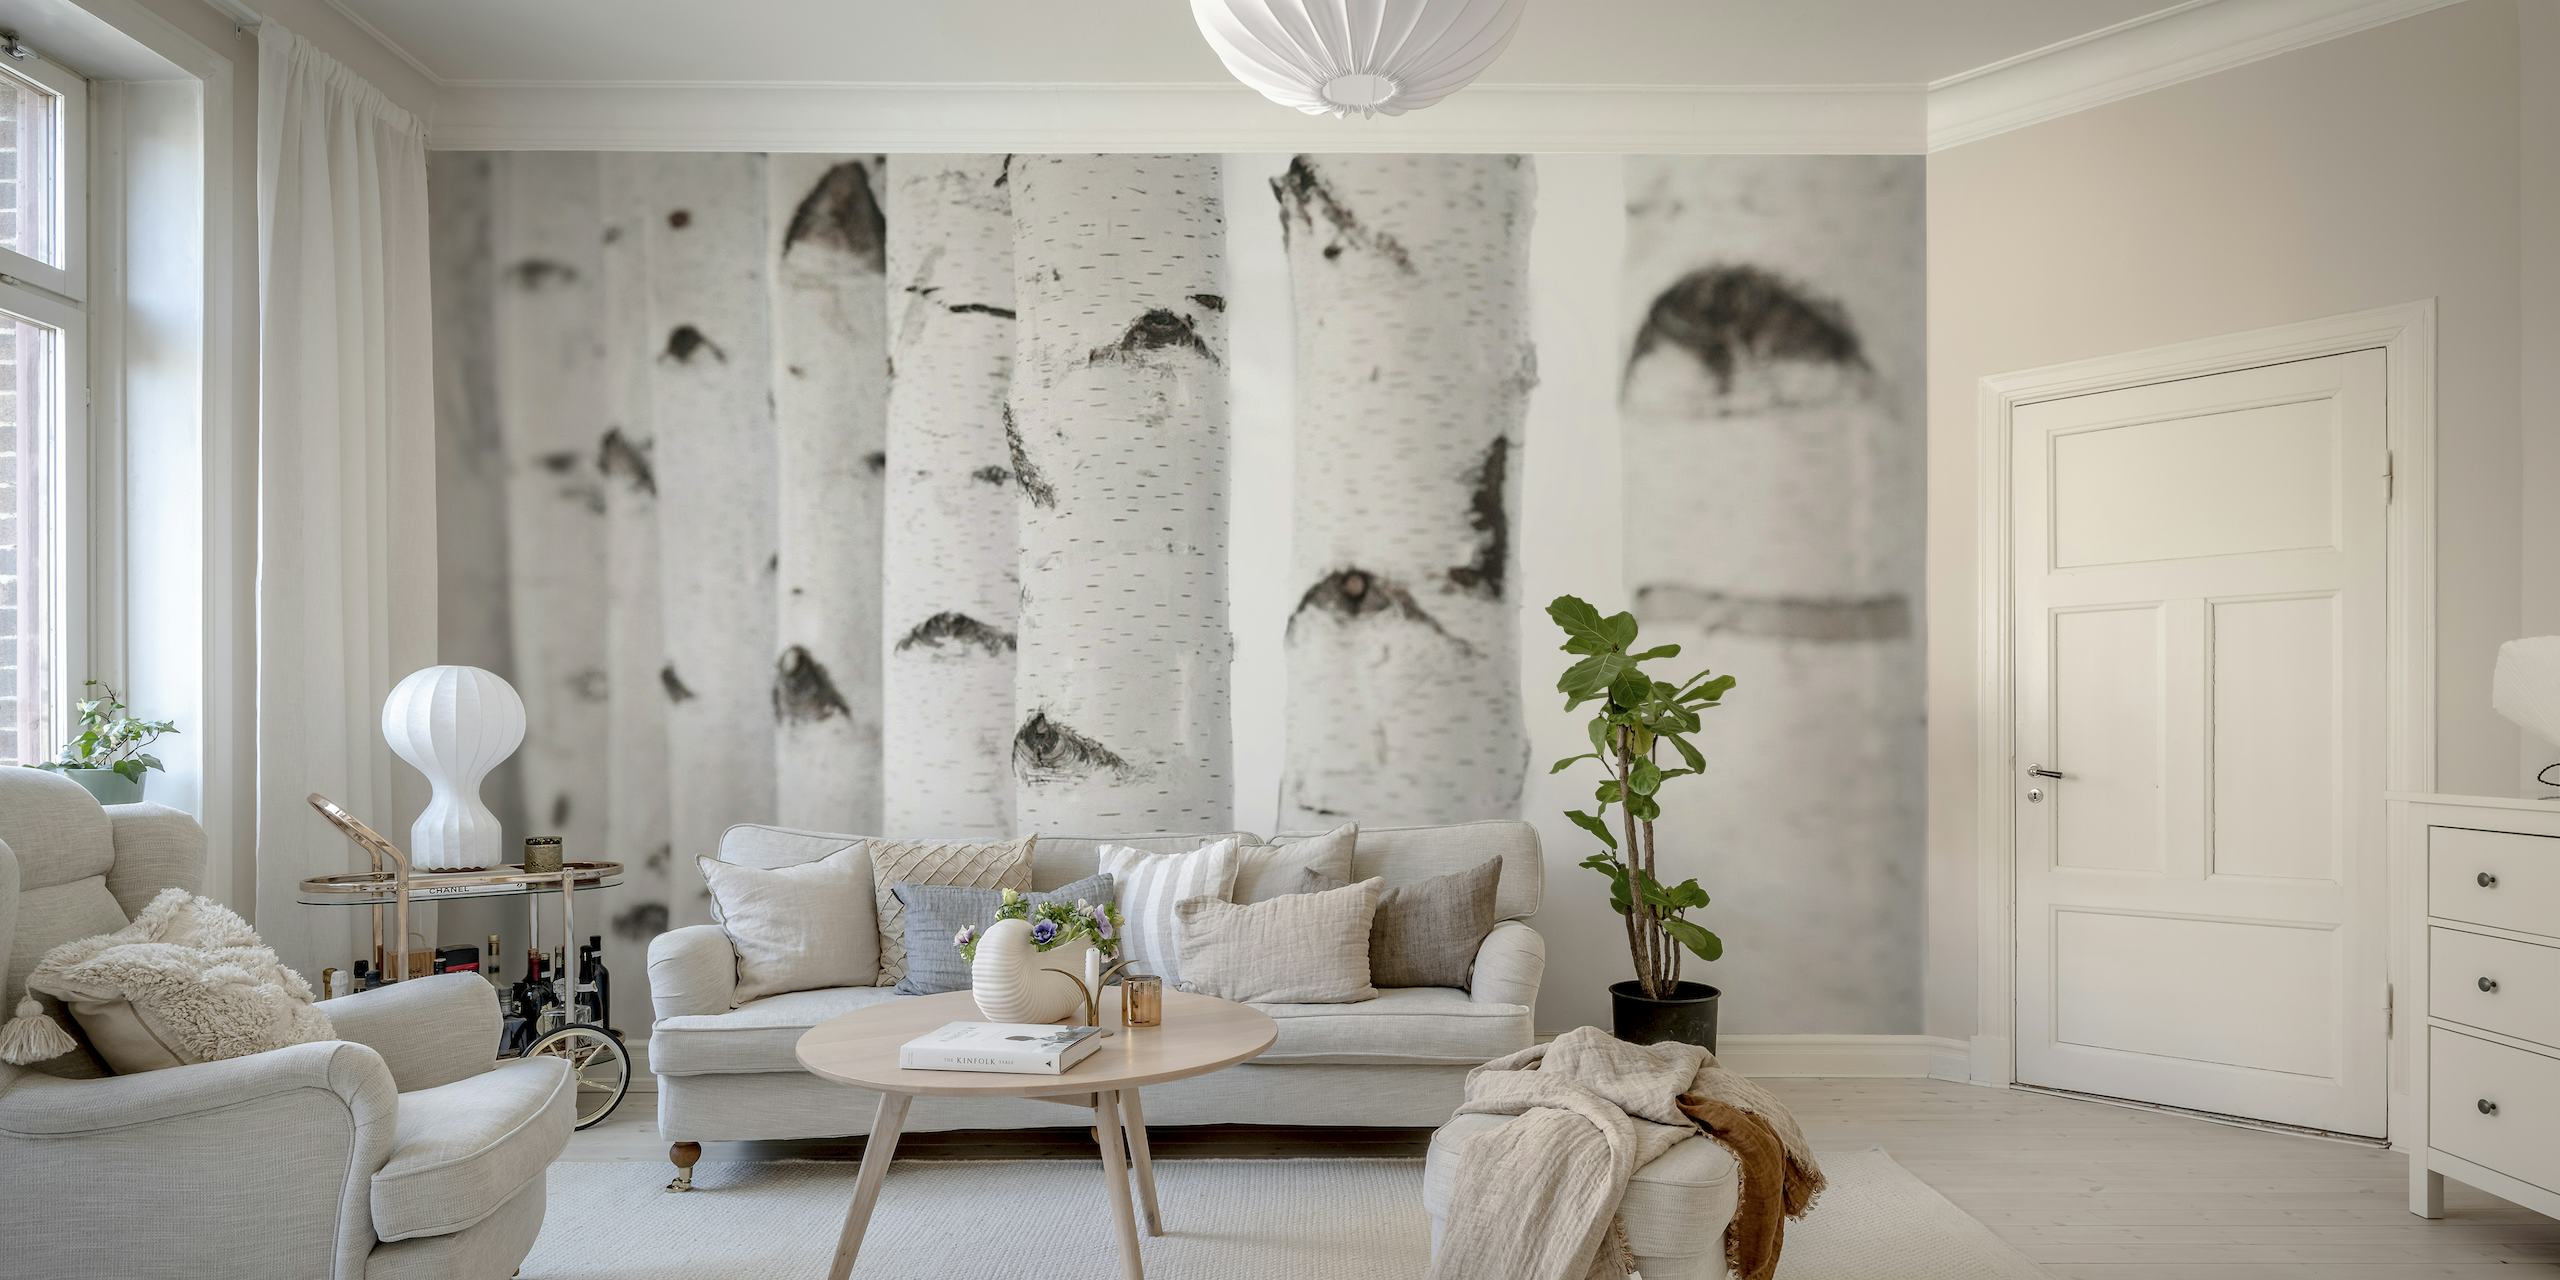 A wall mural featuring a close-up view of white birch trunks with black markings, ideal for interior decor.